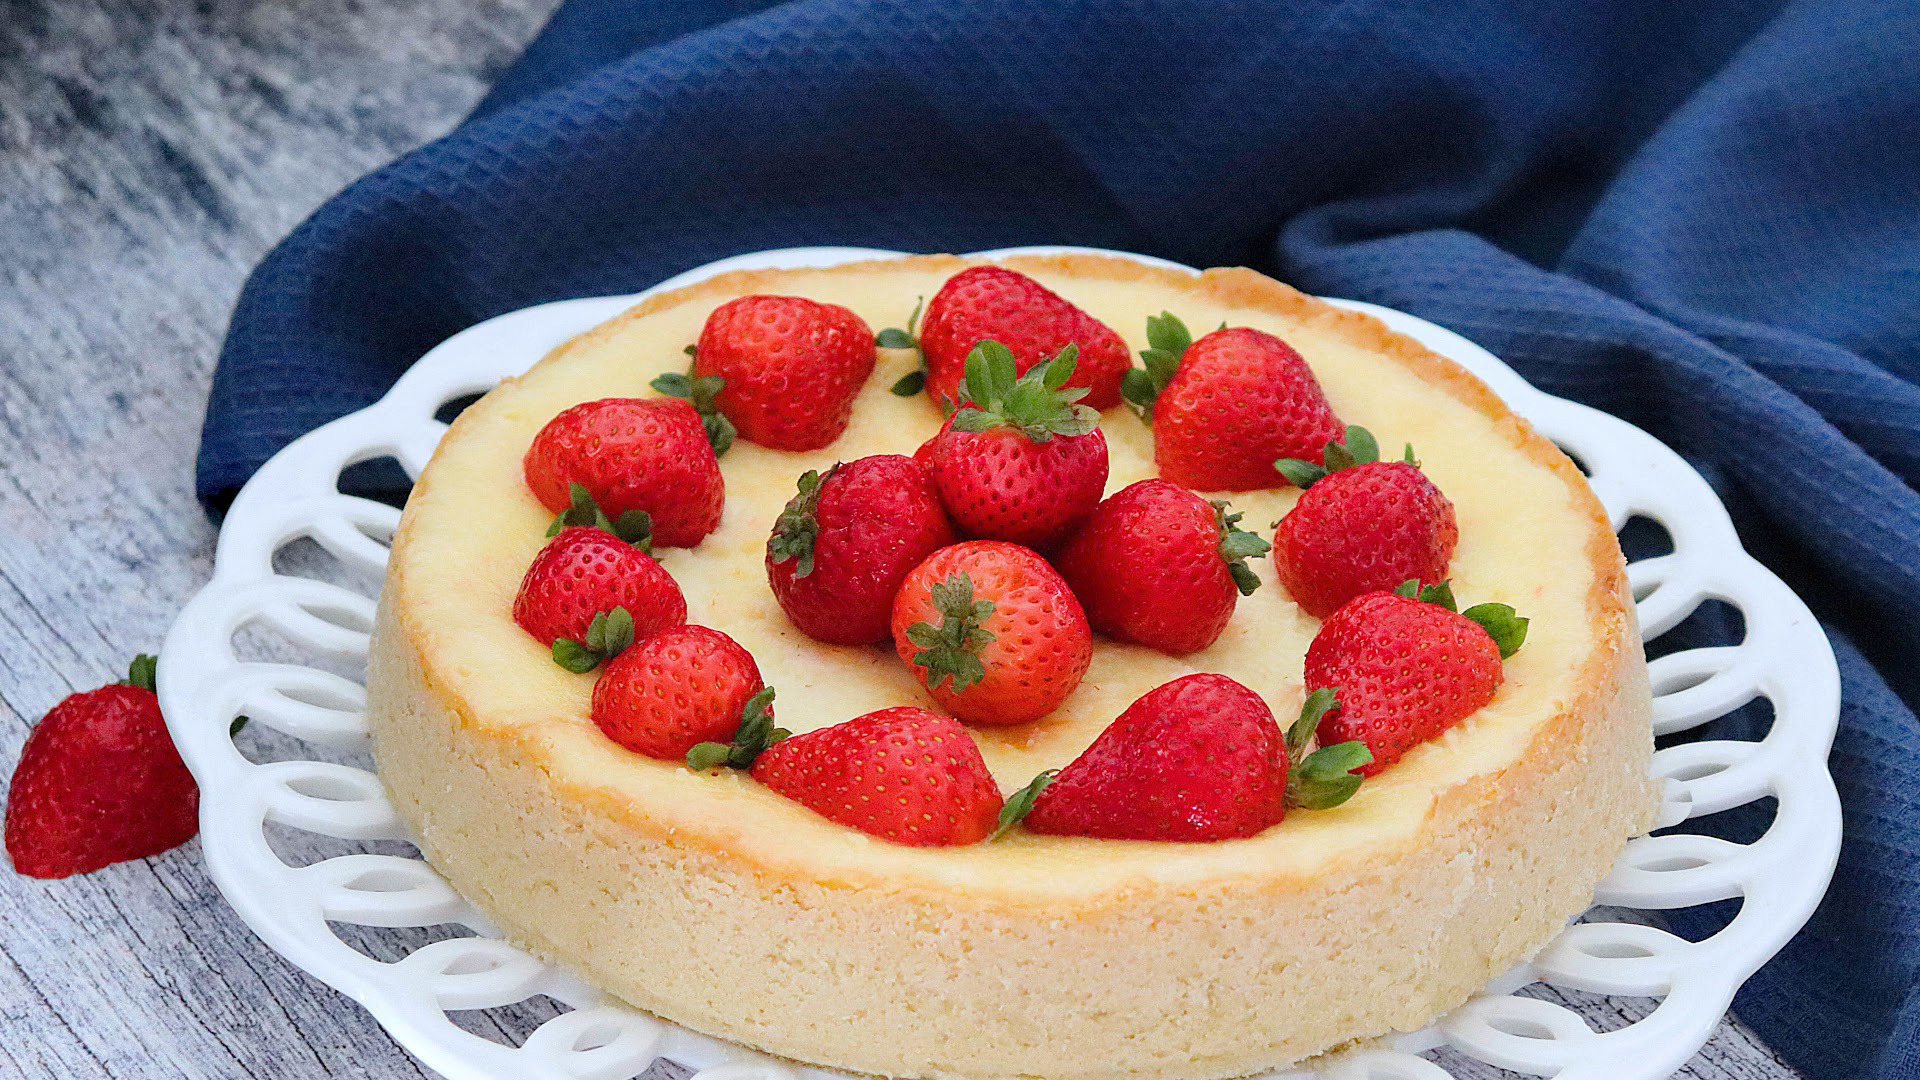 Classic, Simple, Sweet - Cheesecake In A Blender